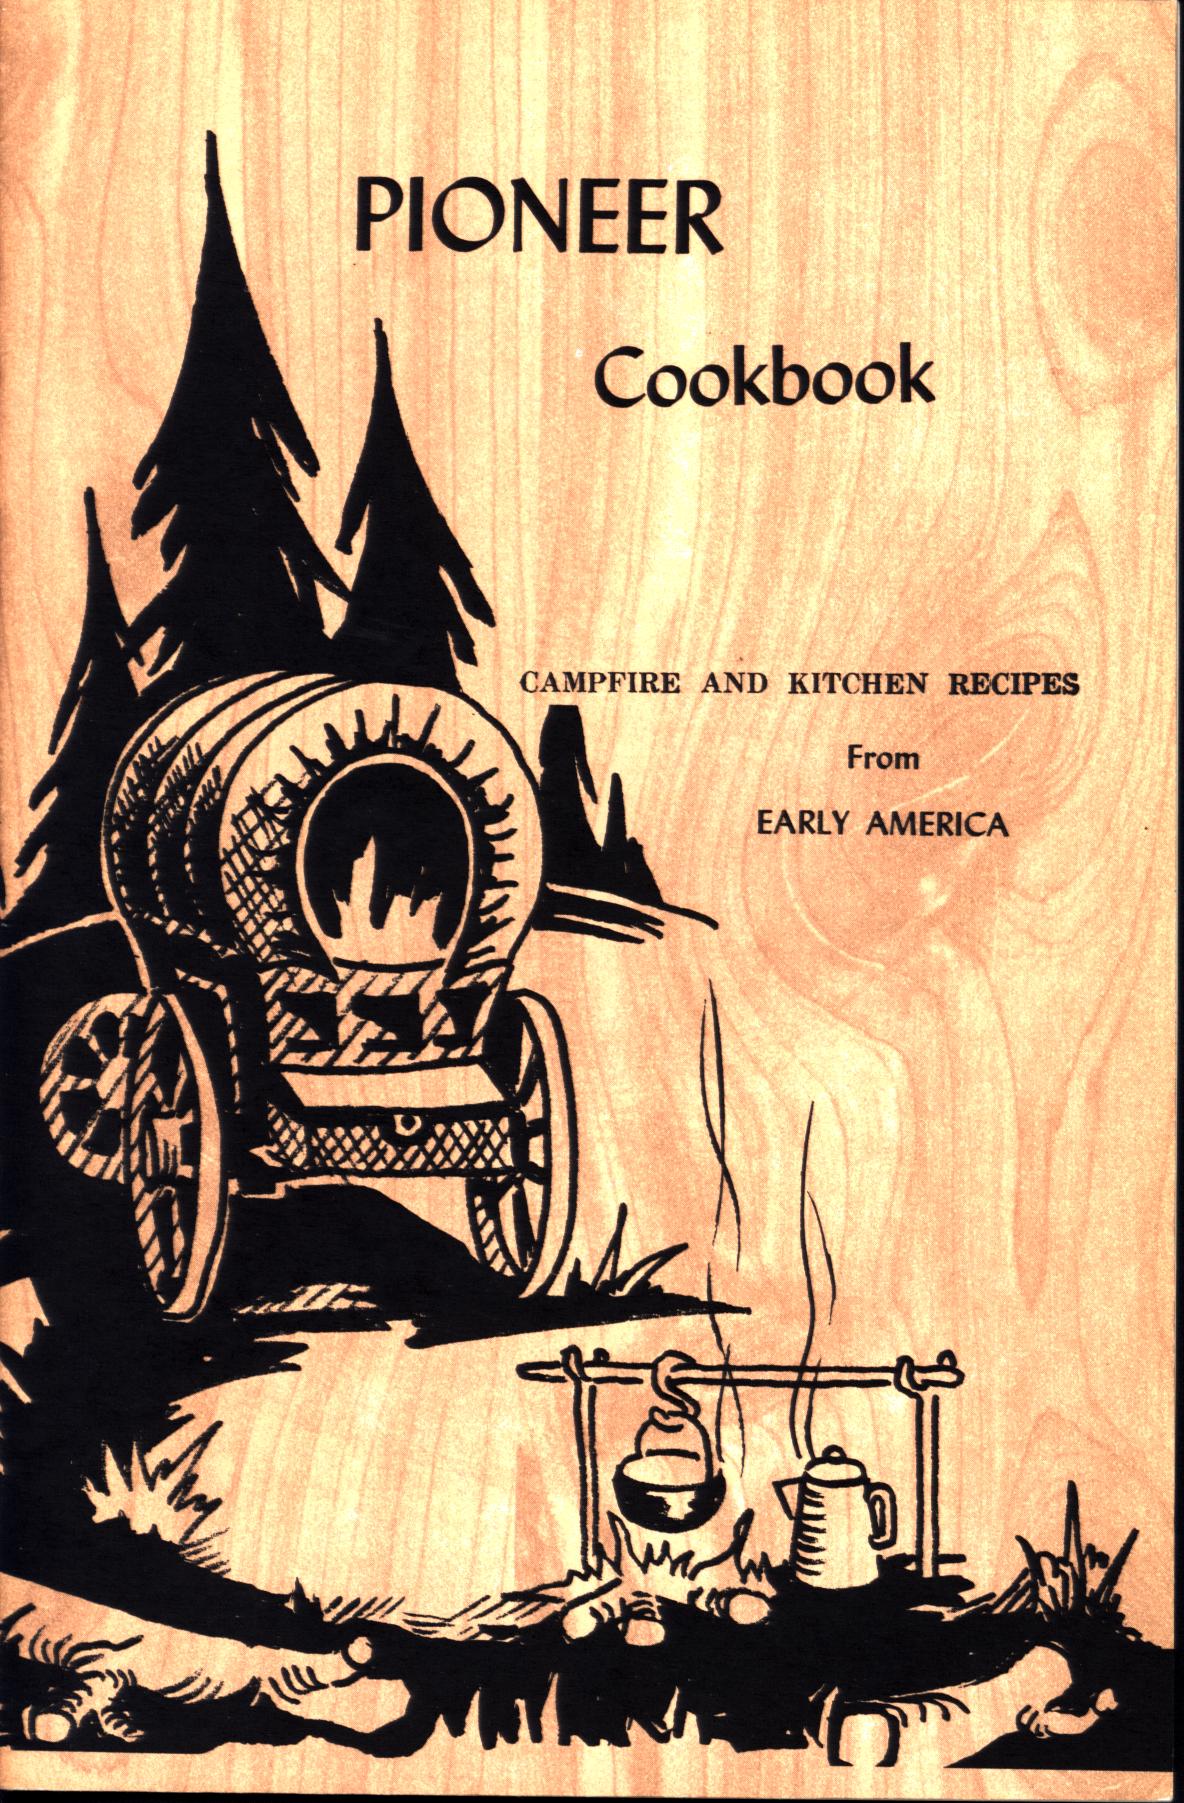 PIONEER COOKBOOK: favorite campfire and kitchen recipes from early America.